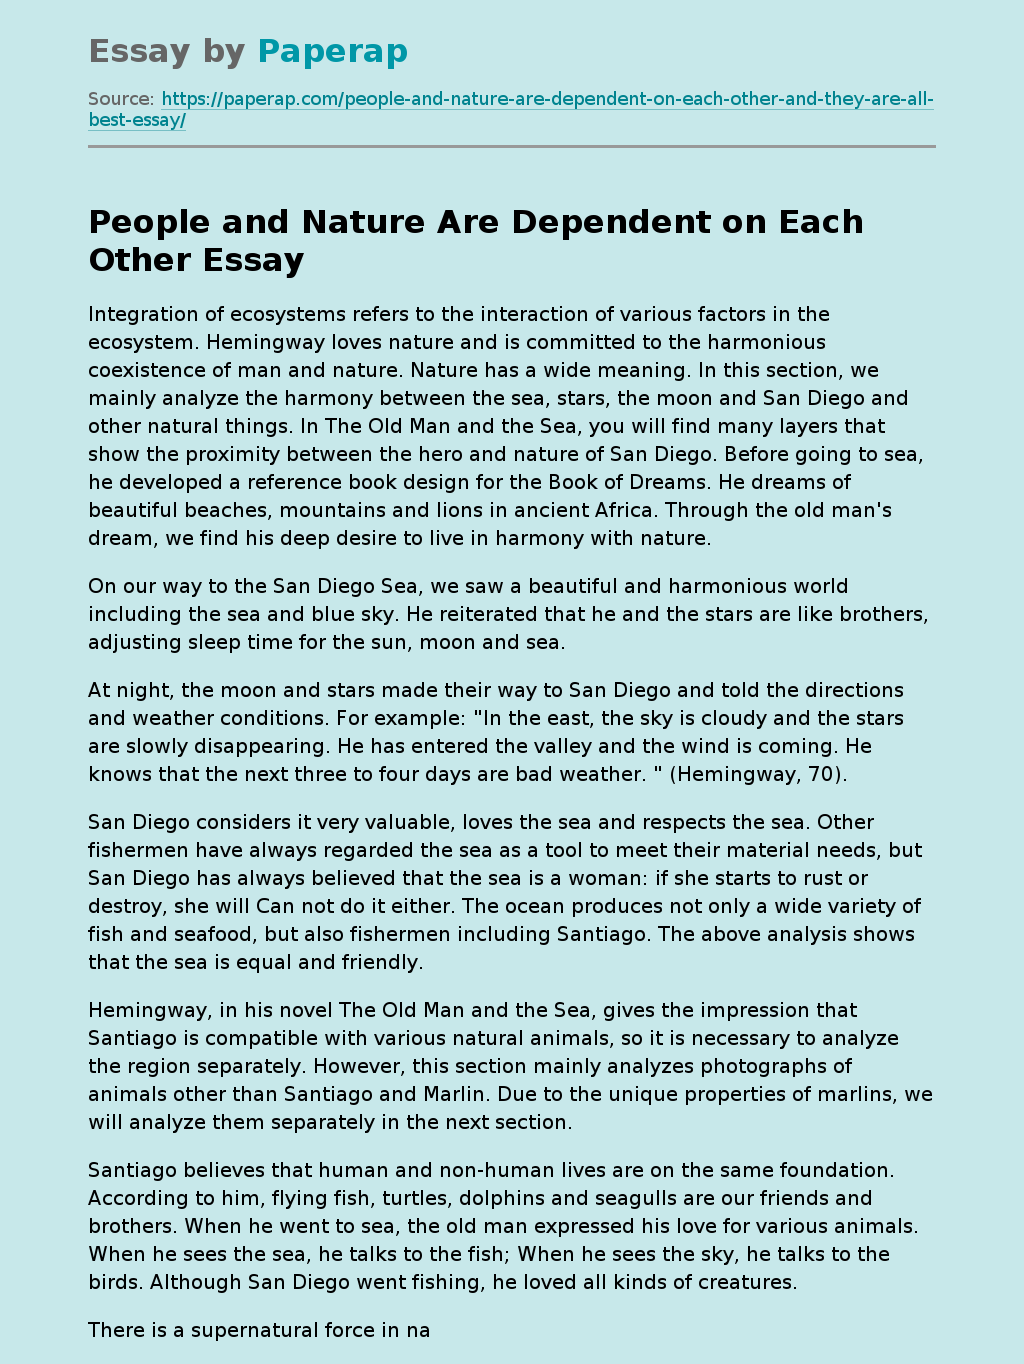 People and Nature Are Dependent on Each Other